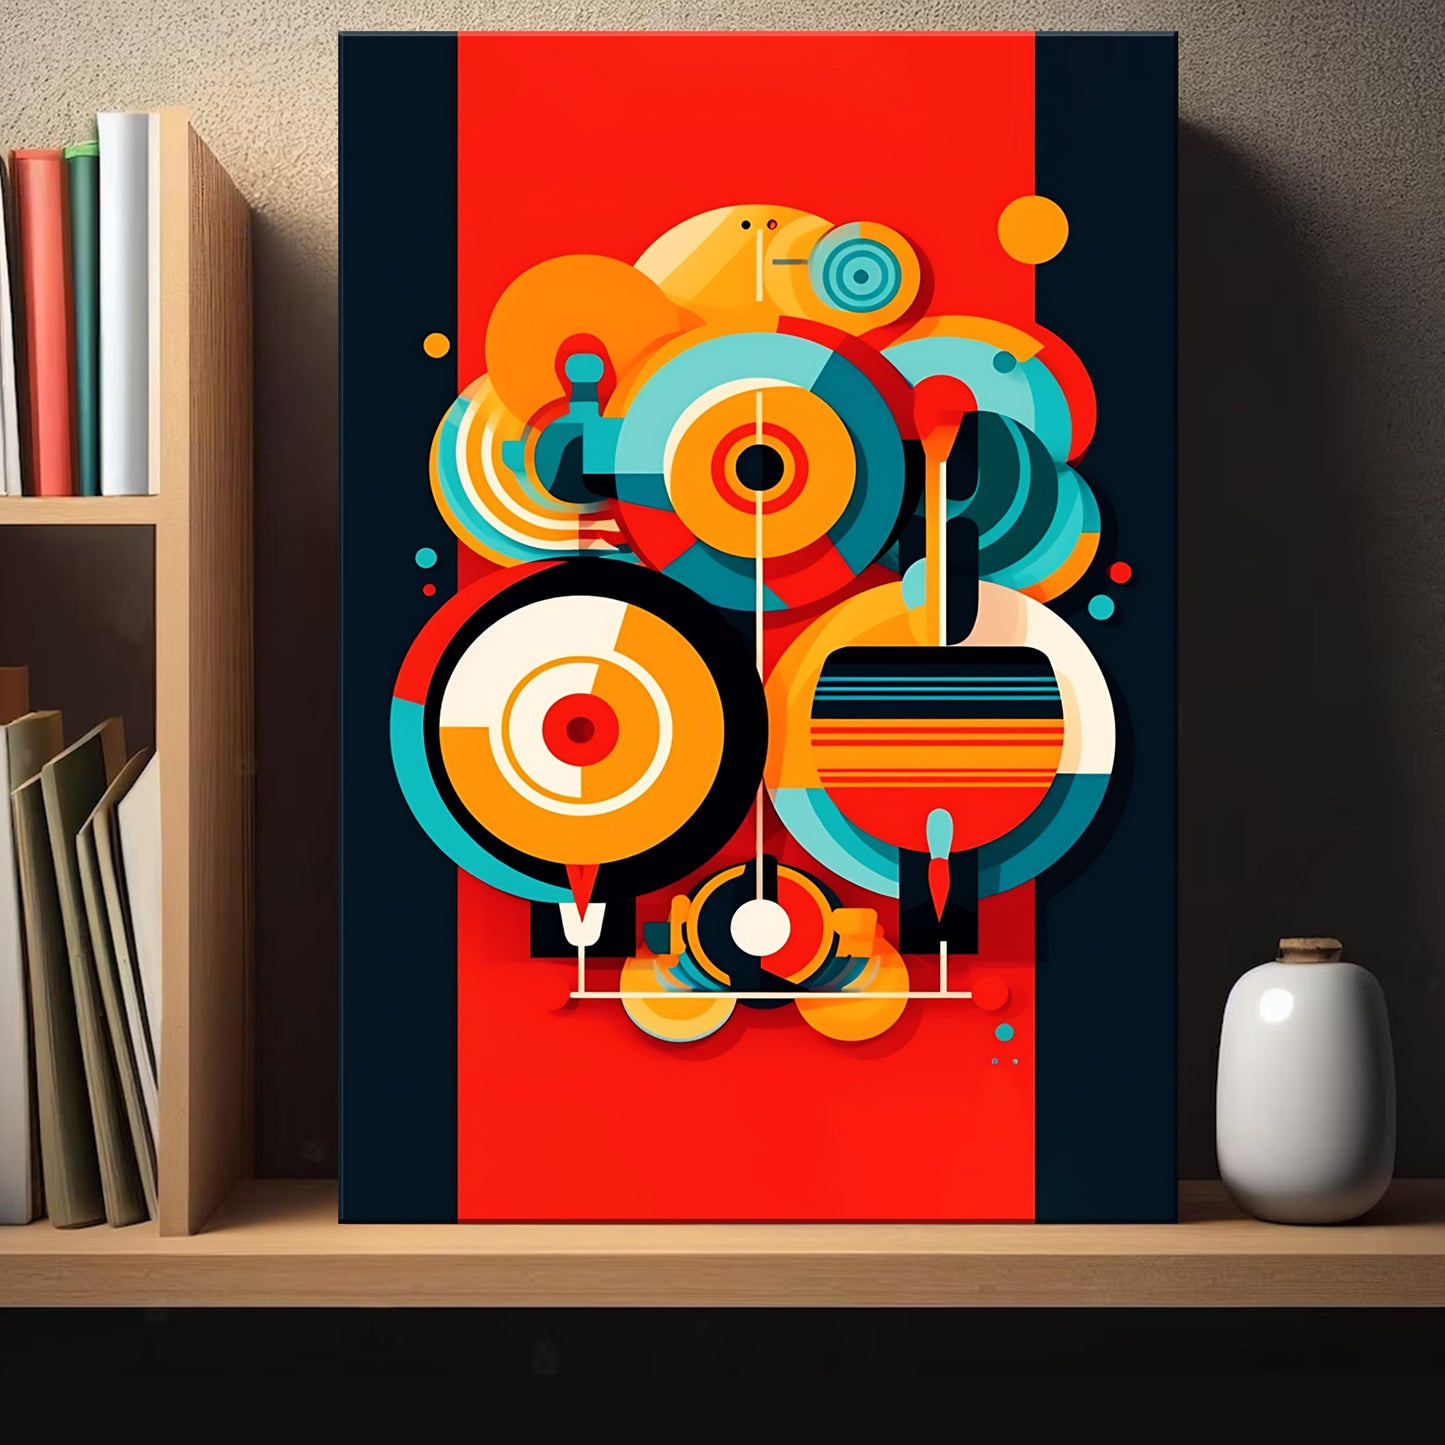 Cymbal Abstract Canvas Wall Art Style 2 - Image by Tailored Canvases